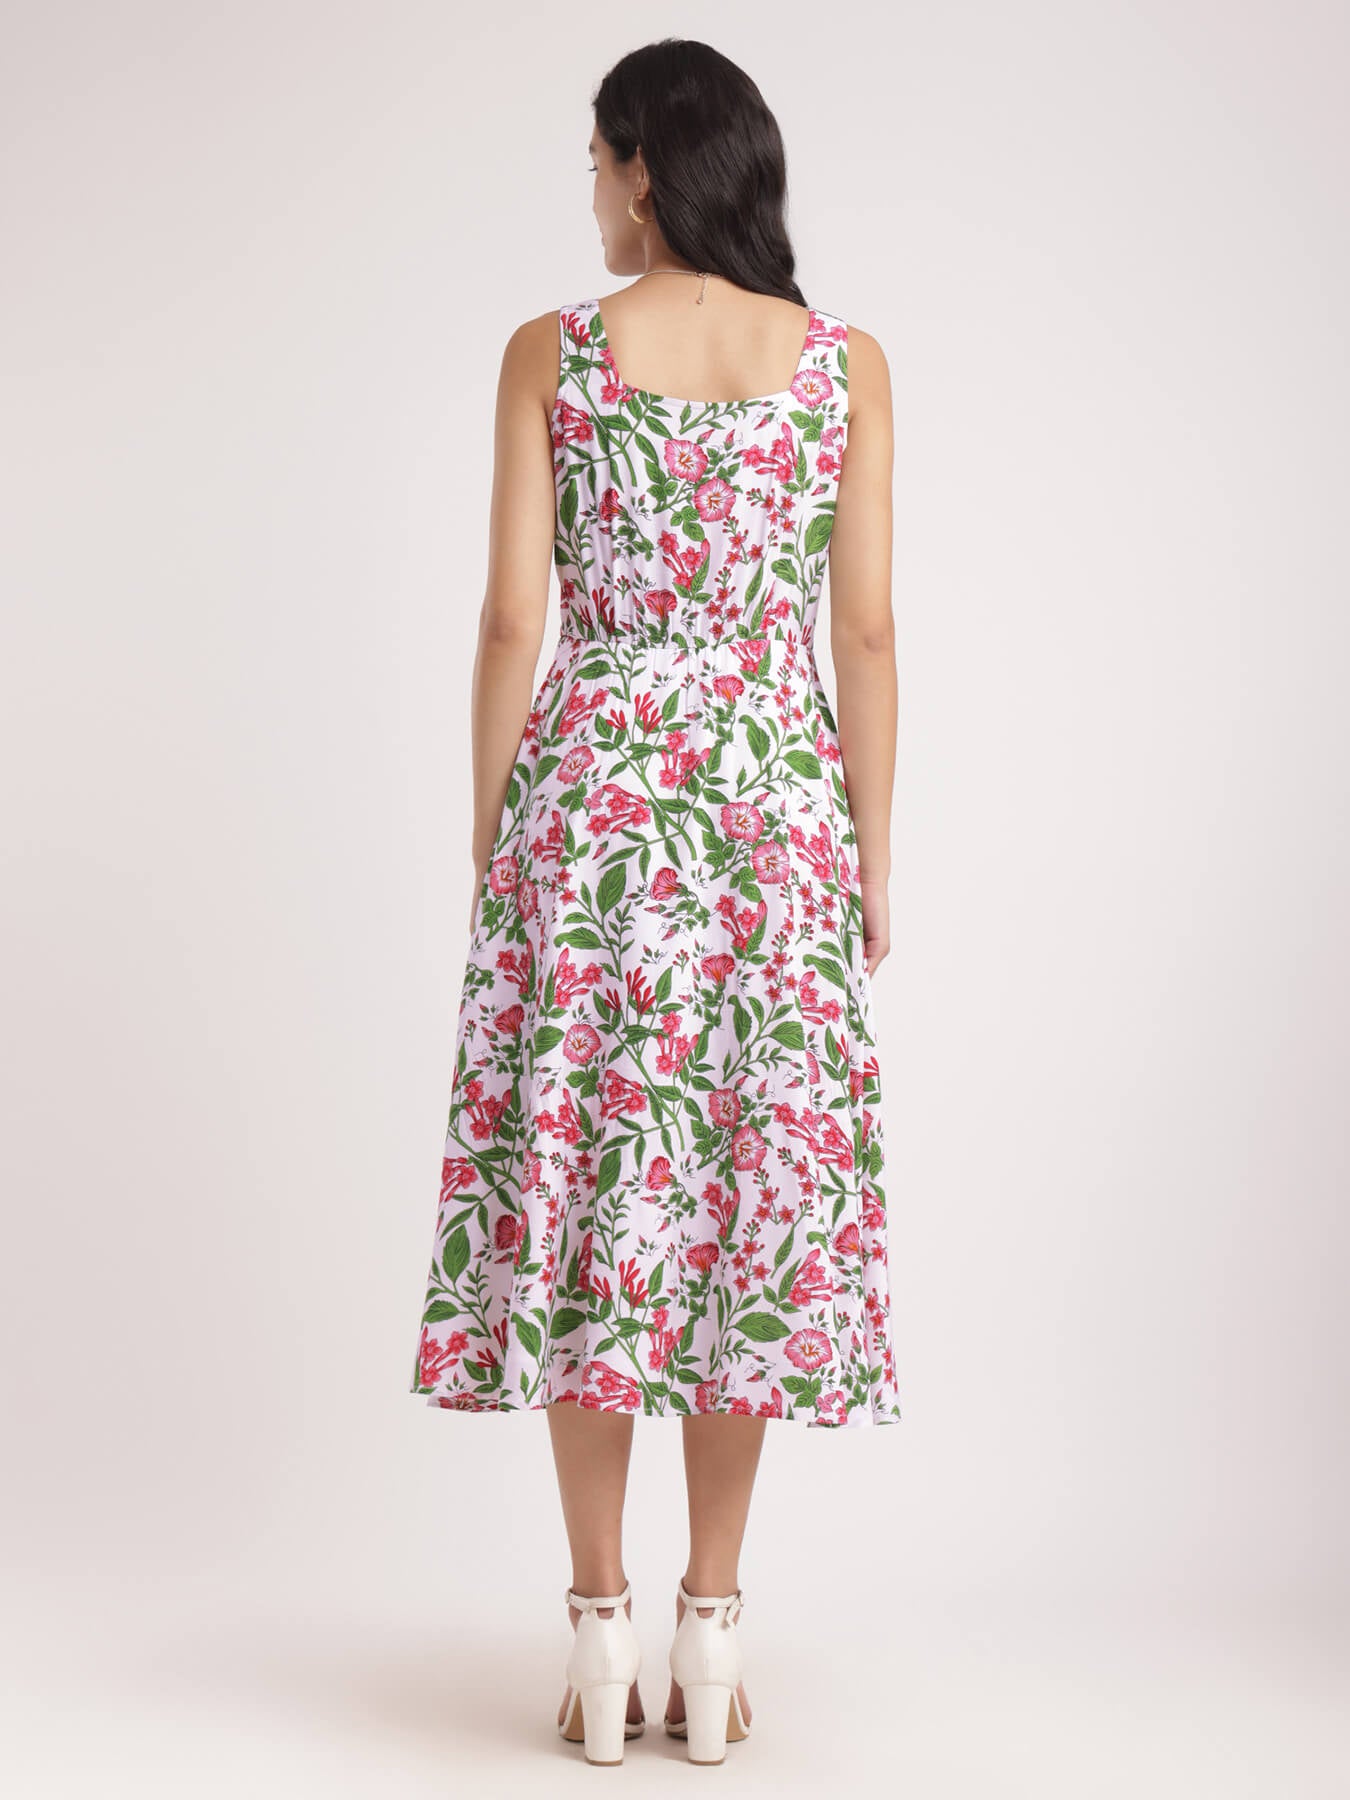 Fit And Flare Floral Dress - White And Pink